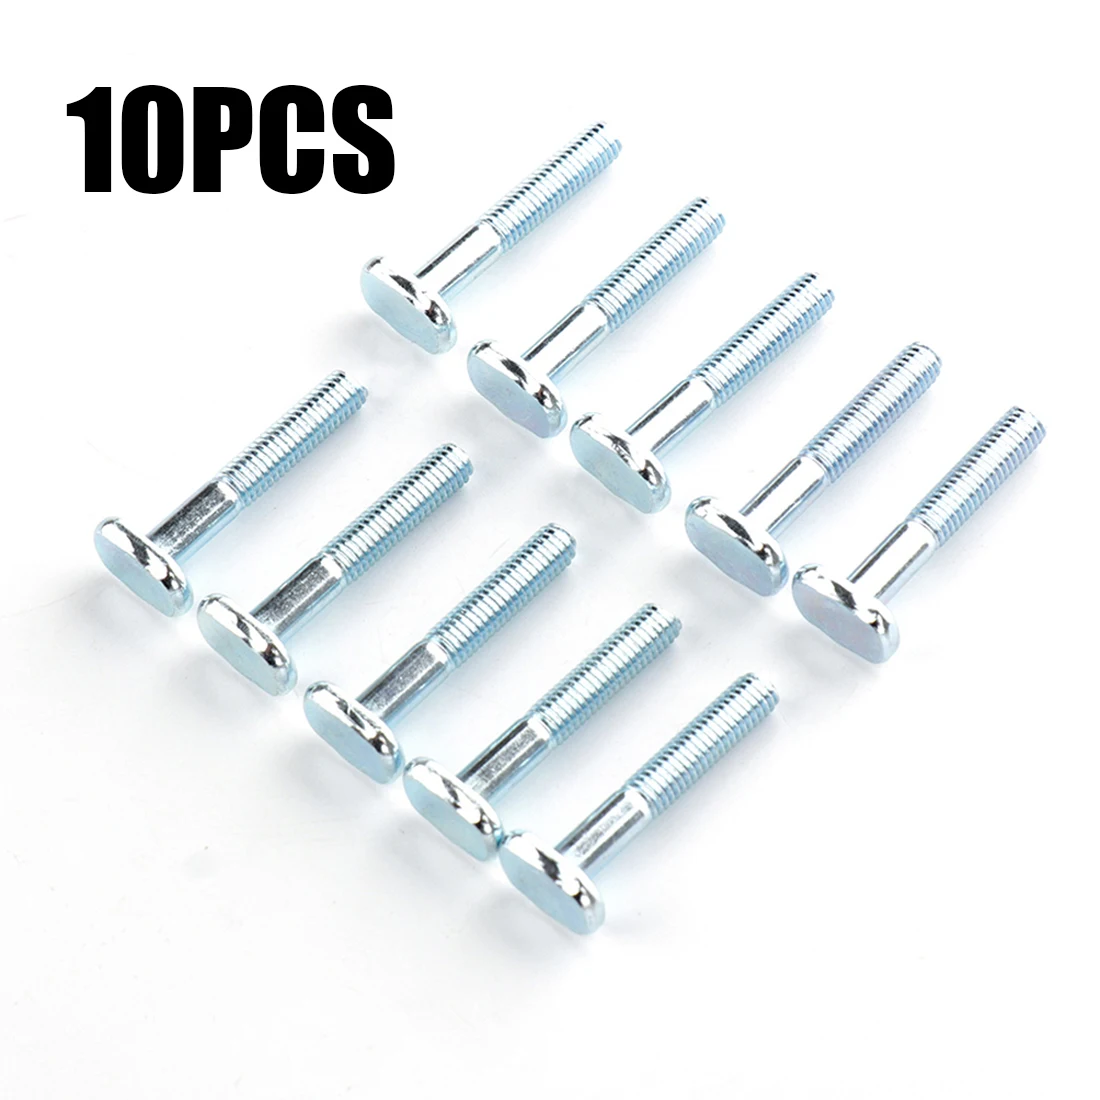 10pcs M6x40mm T-Nut Sliding Screws T-track T-slot Miter Track Jig Table Saw Router Carpentry Jigs Woodworking Tool